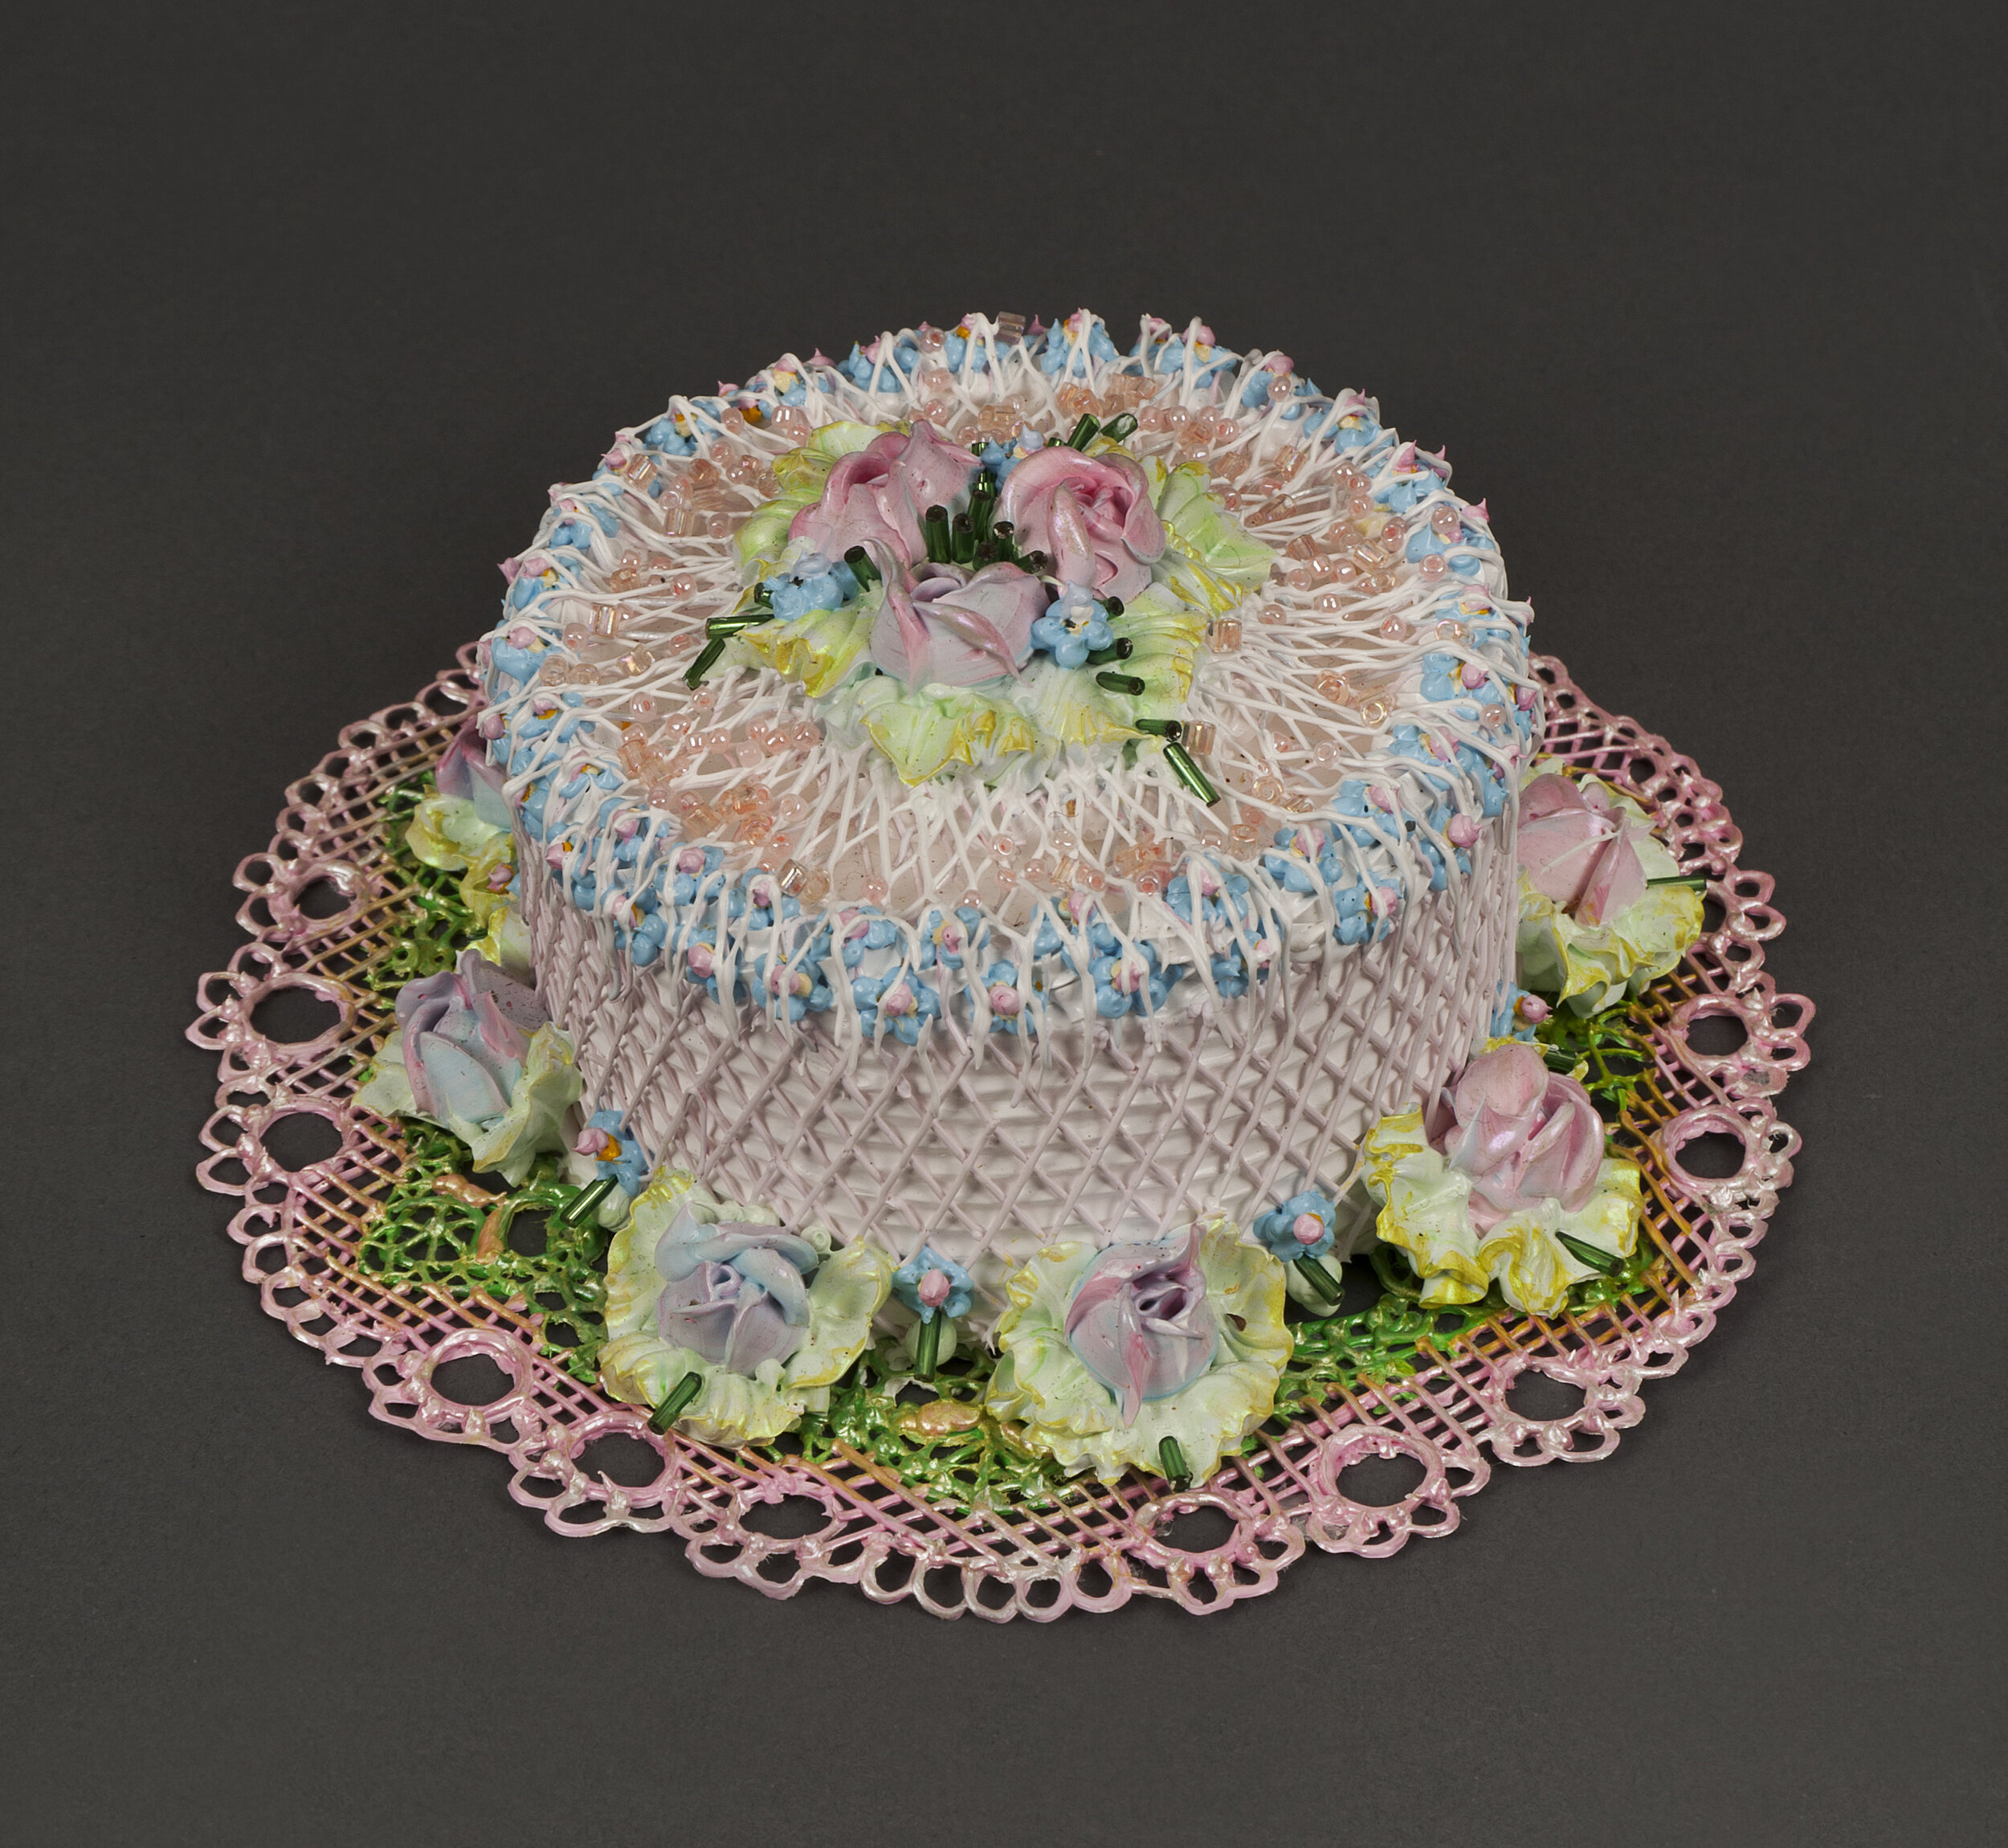 Multi-colored cake decorated with roses, strings of pink icing, and beads on a pink doily